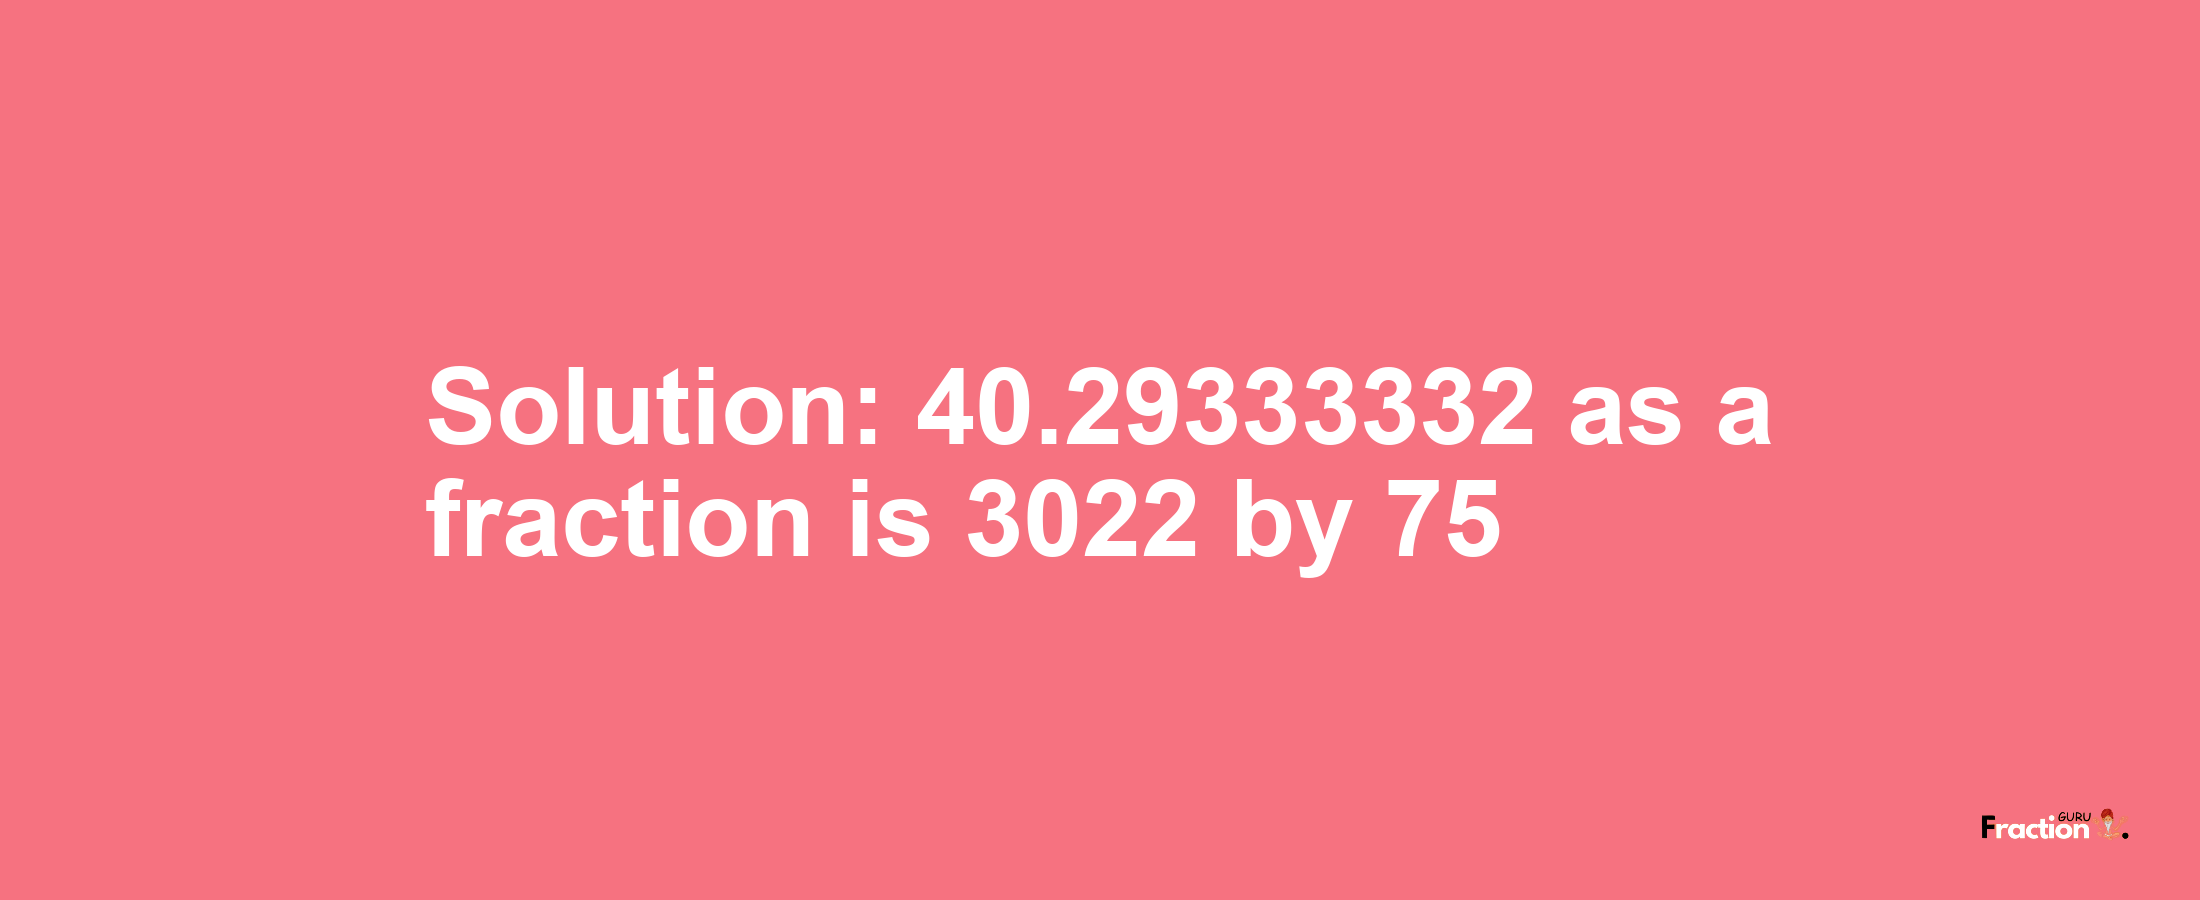 Solution:40.29333332 as a fraction is 3022/75